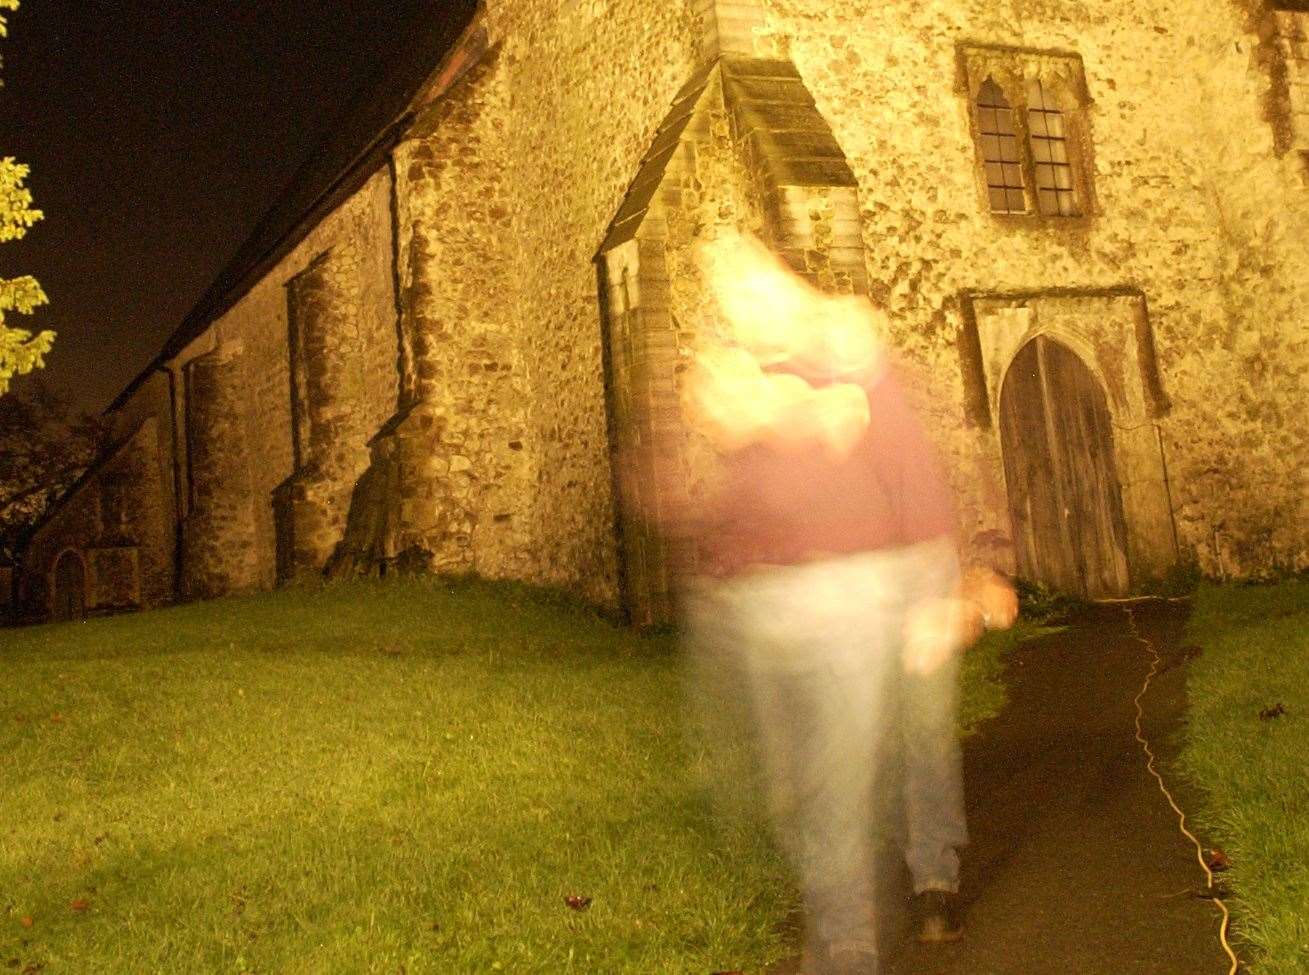 Pluckley is said to be Britain's most haunted village